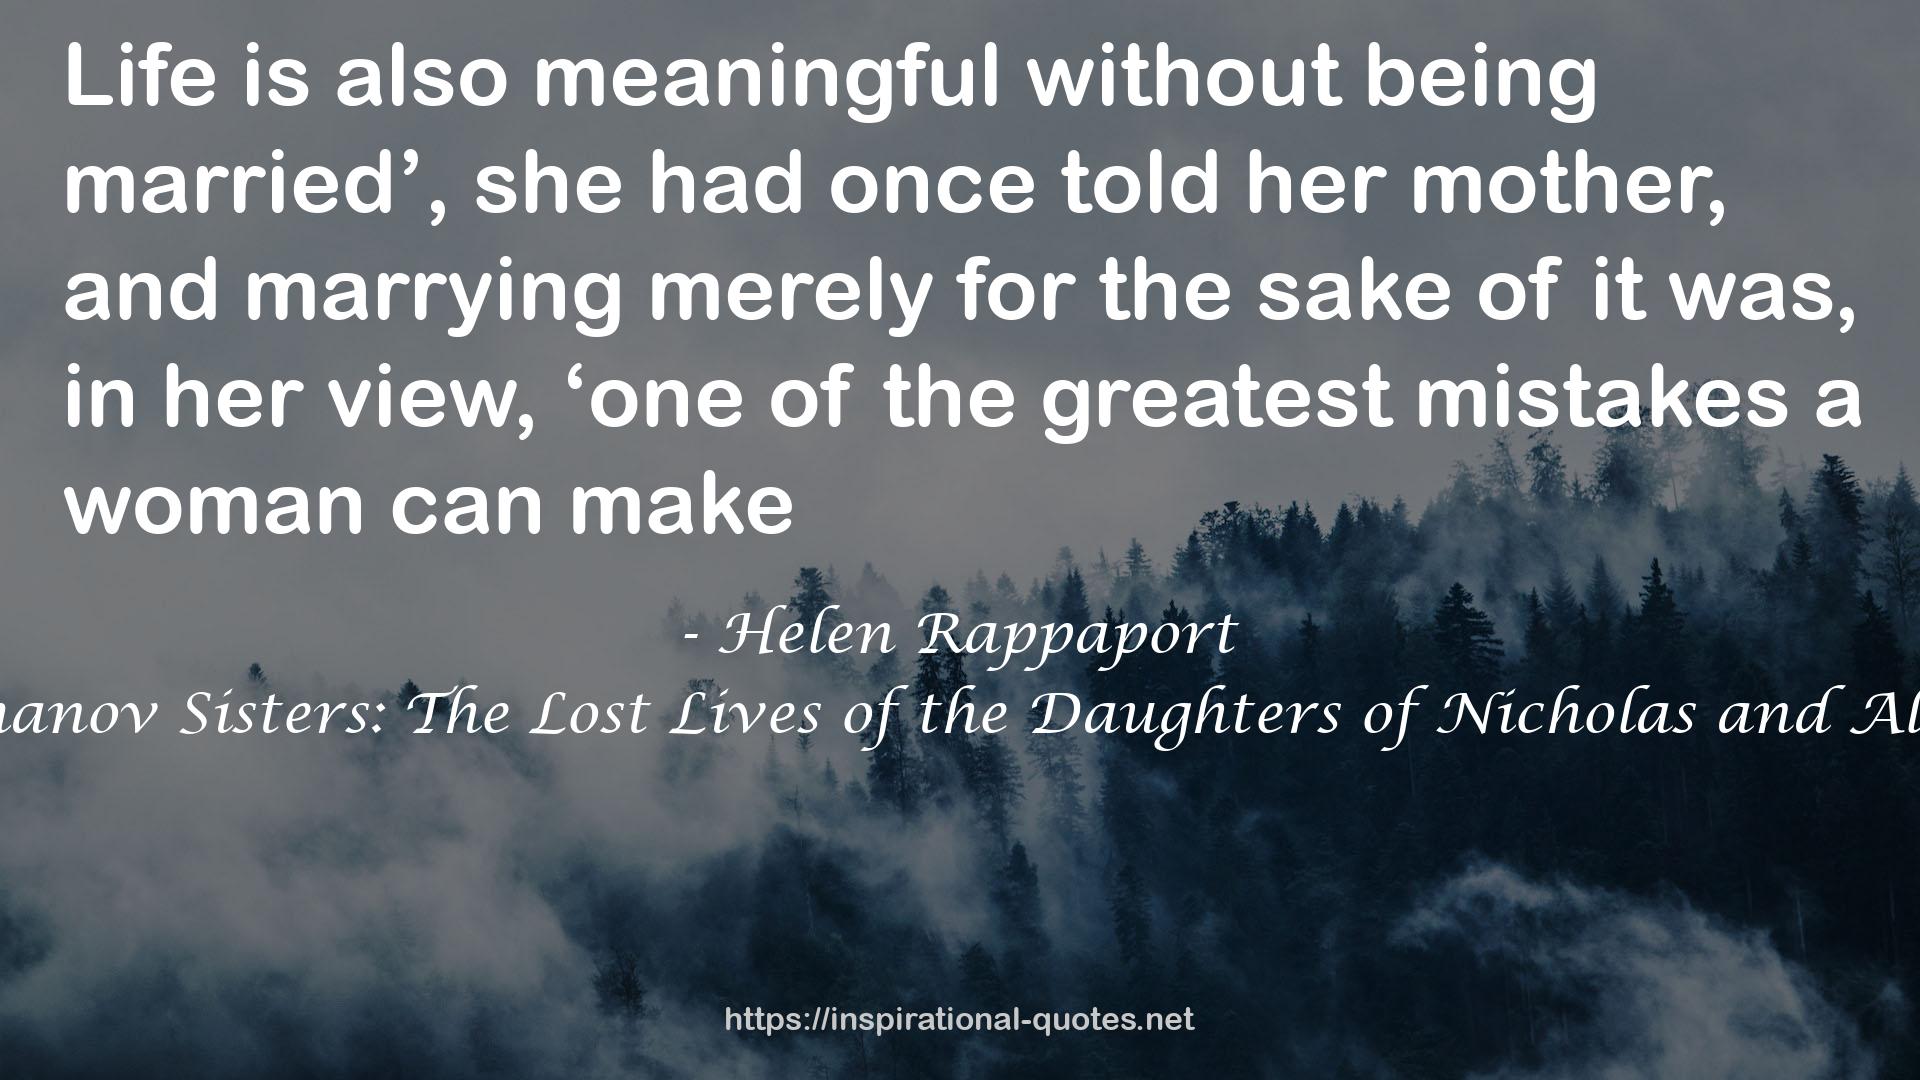 The Romanov Sisters: The Lost Lives of the Daughters of Nicholas and Alexandra QUOTES